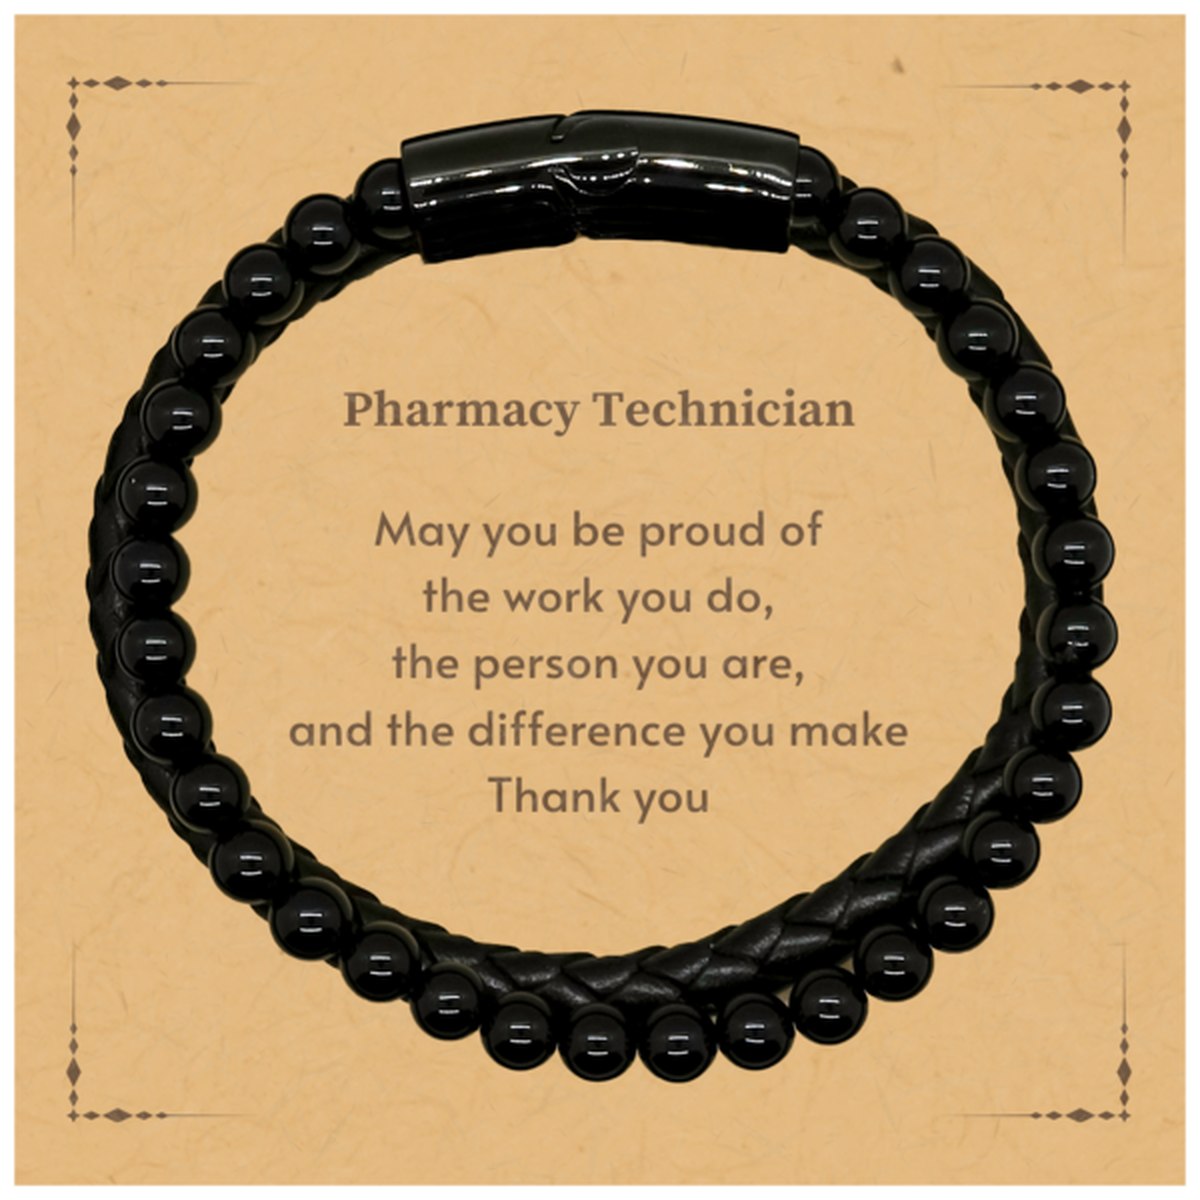 Heartwarming Stone Leather Bracelets Retirement Coworkers Gifts for Pharmacy Technician, Pharmacy Technician May You be proud of the work you do, the person you are Gifts for Boss Men Women Friends